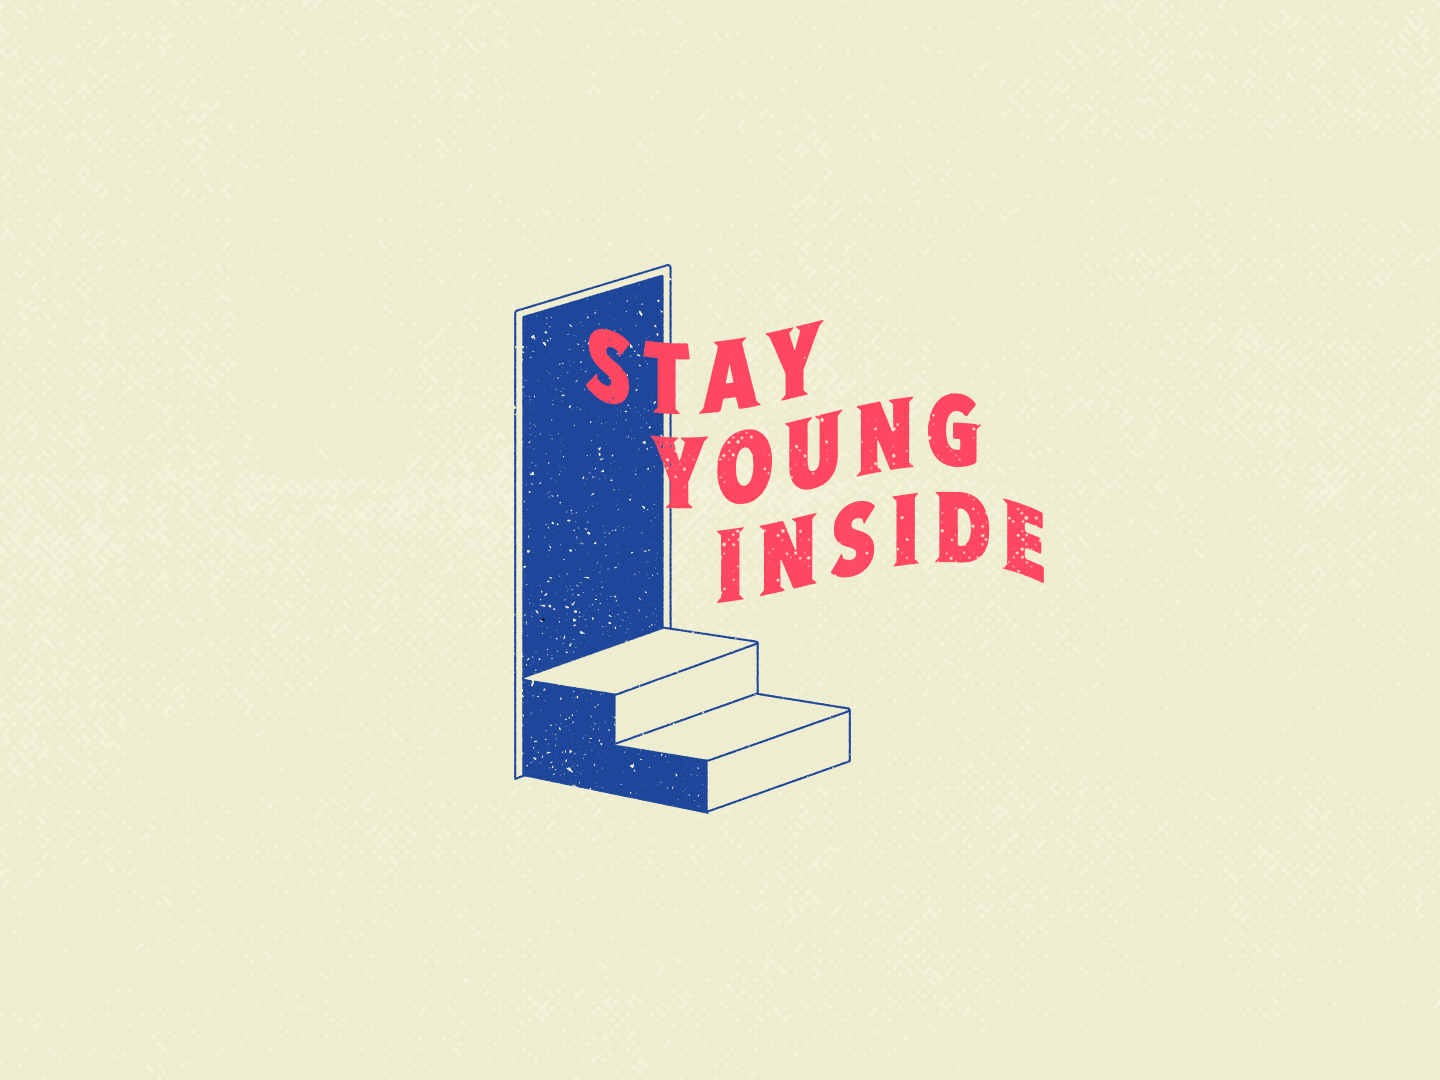 Stay Young Inside Doorway T-Shirt Design by Martin Craster on Dribbble